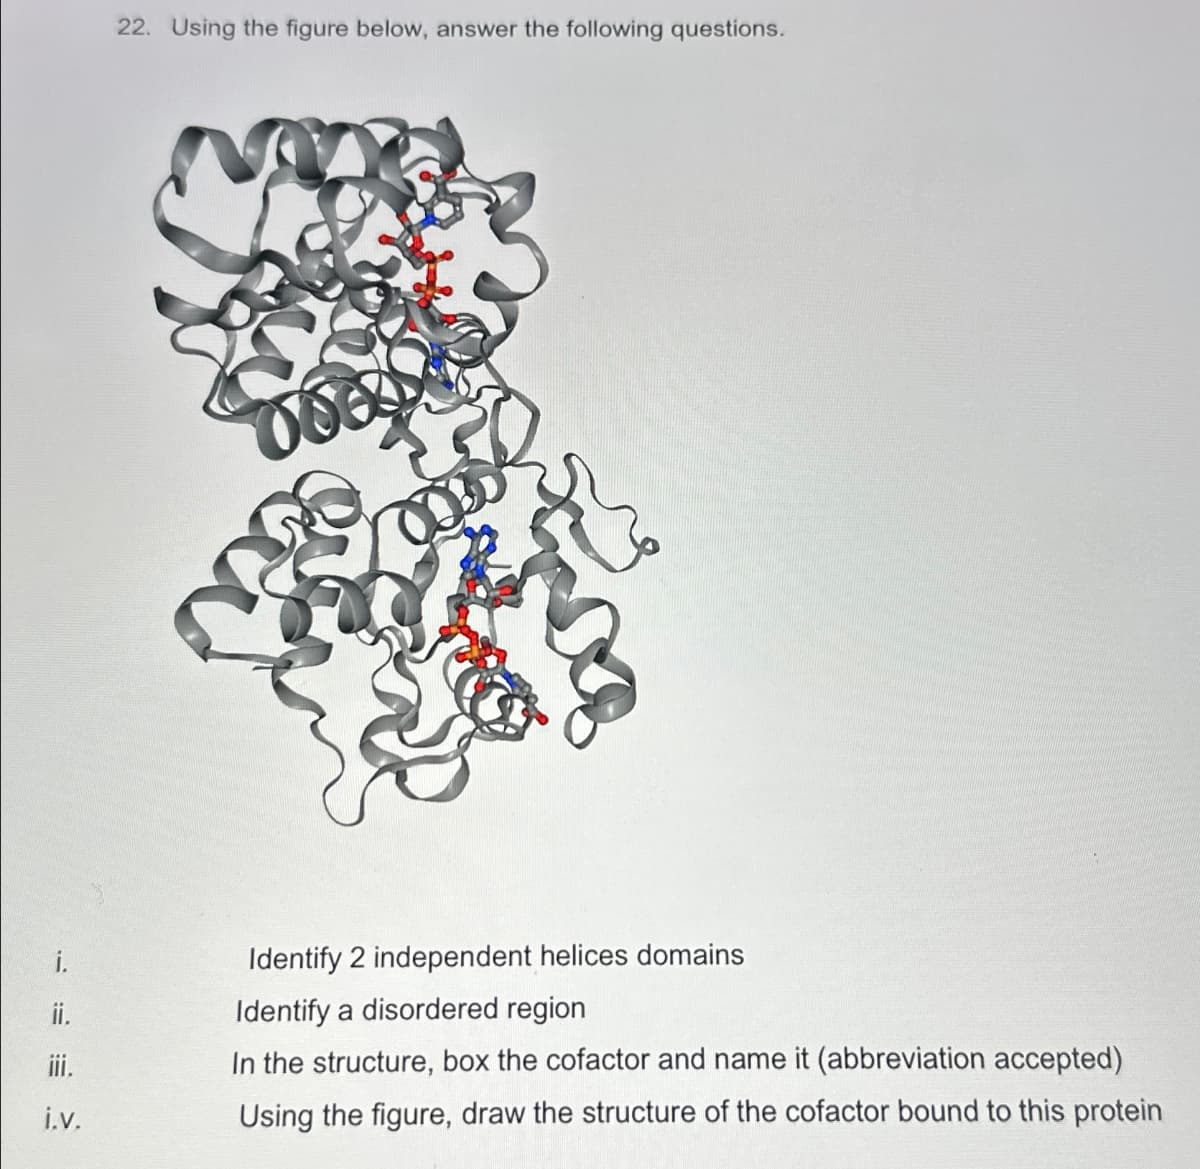 i.
ii.
i.v.
22. Using the figure below, answer the following questions.
Identify 2 independent helices domains
Identify a disordered region
In the structure, box the cofactor and name it (abbreviation accepted)
Using the figure, draw the structure of the cofactor bound to this protein